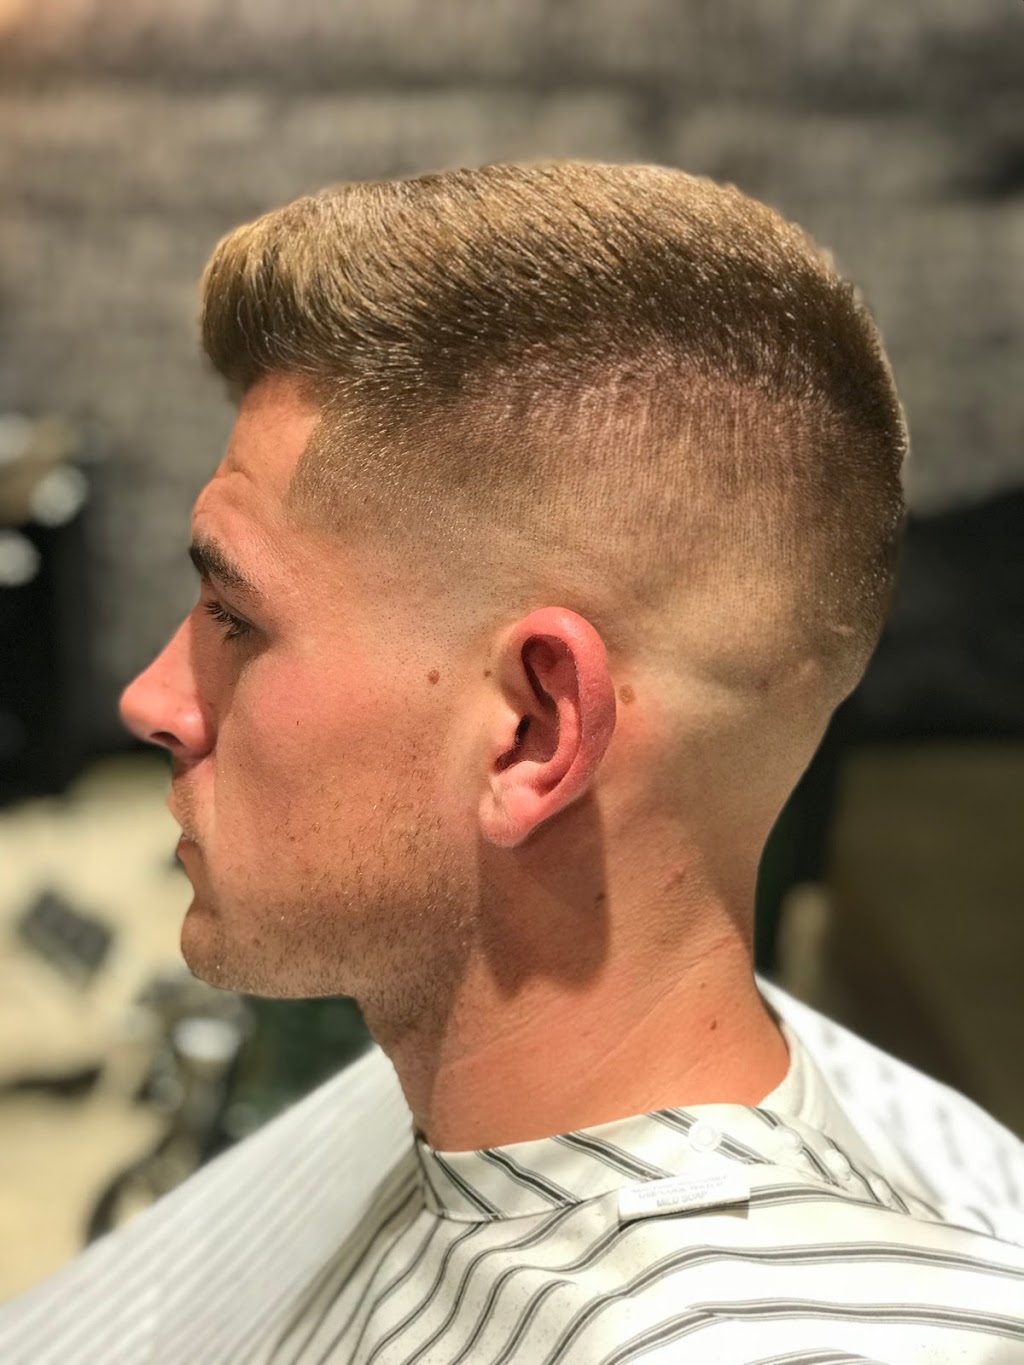 ManCave Barbershop Chatswood | hair care | Shop B-025 Chatswood Chase, 345 Victoria Ave, Chatswood NSW 2067, Australia | 0298847986 OR +61 2 9884 7986